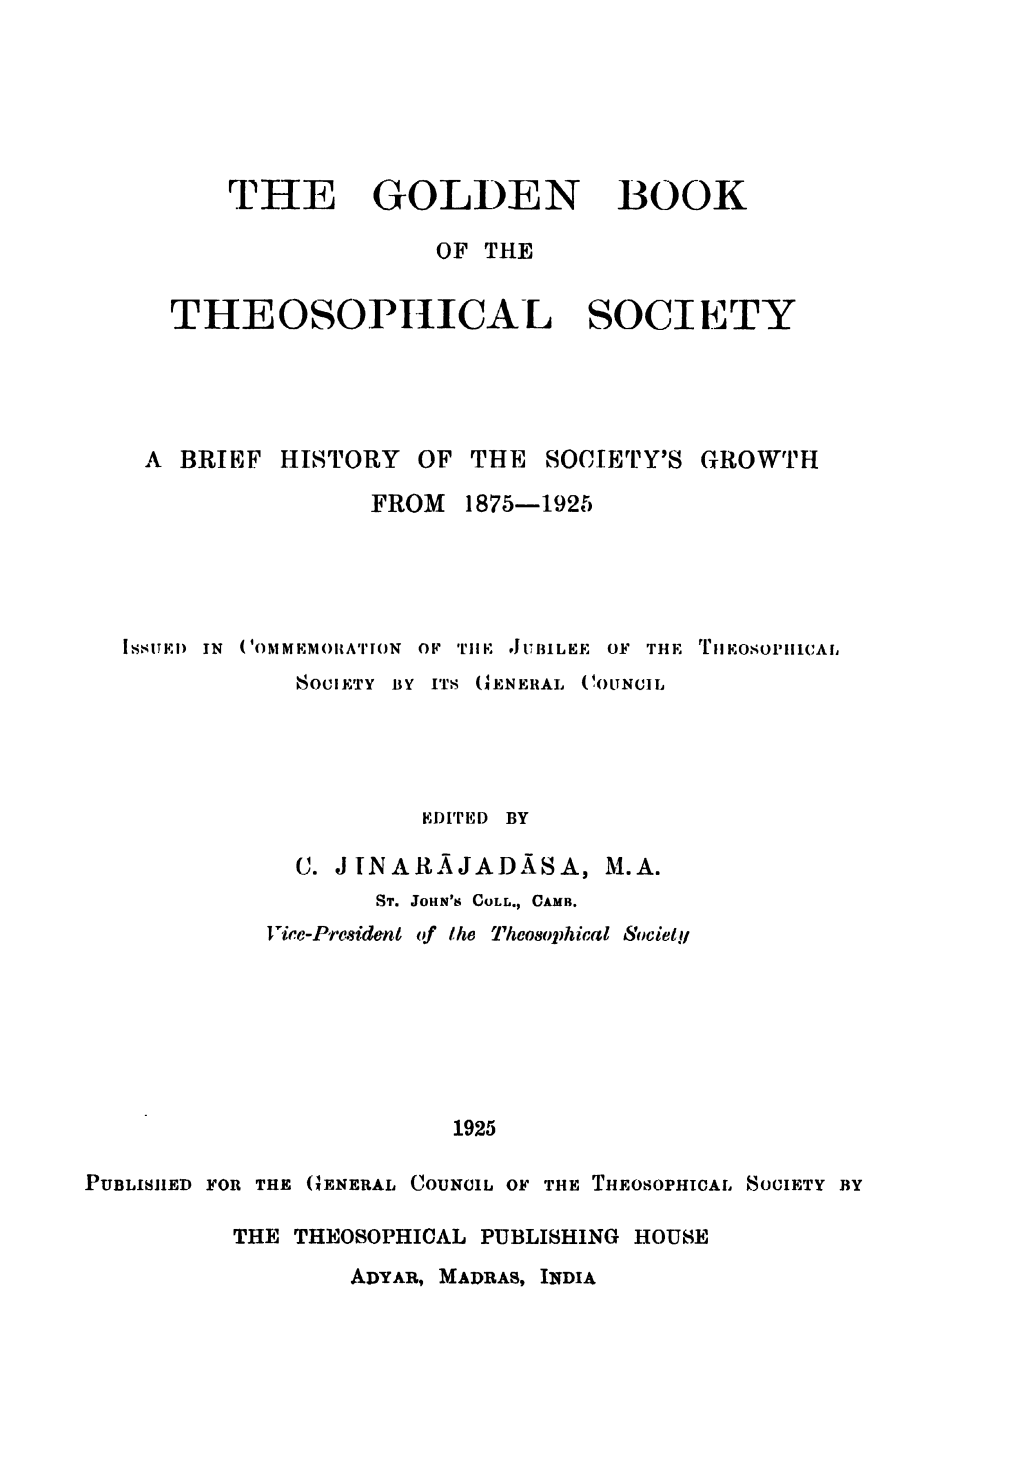 The Golden Book Theosophical Society